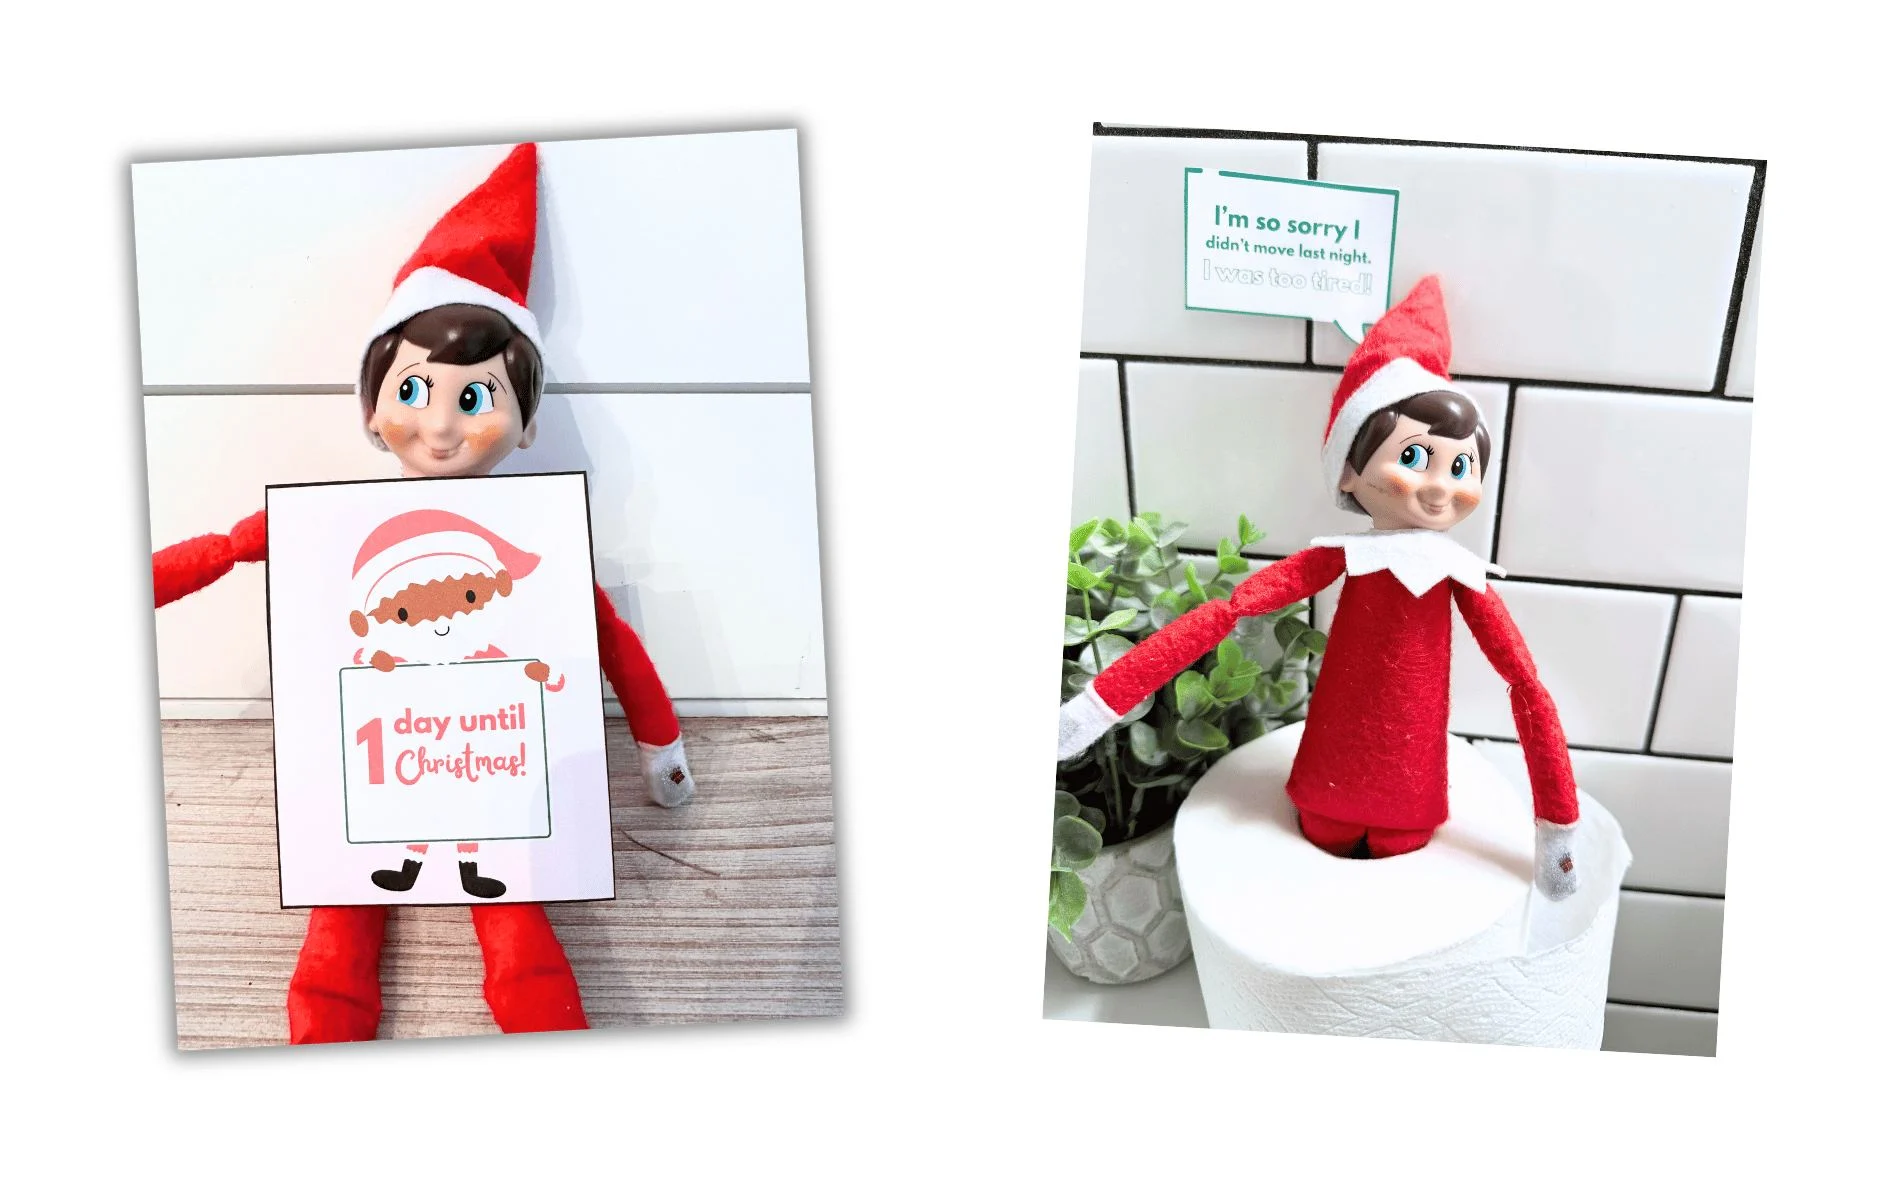 Printable messages and Christmas countdown from the Elf on the Shelf